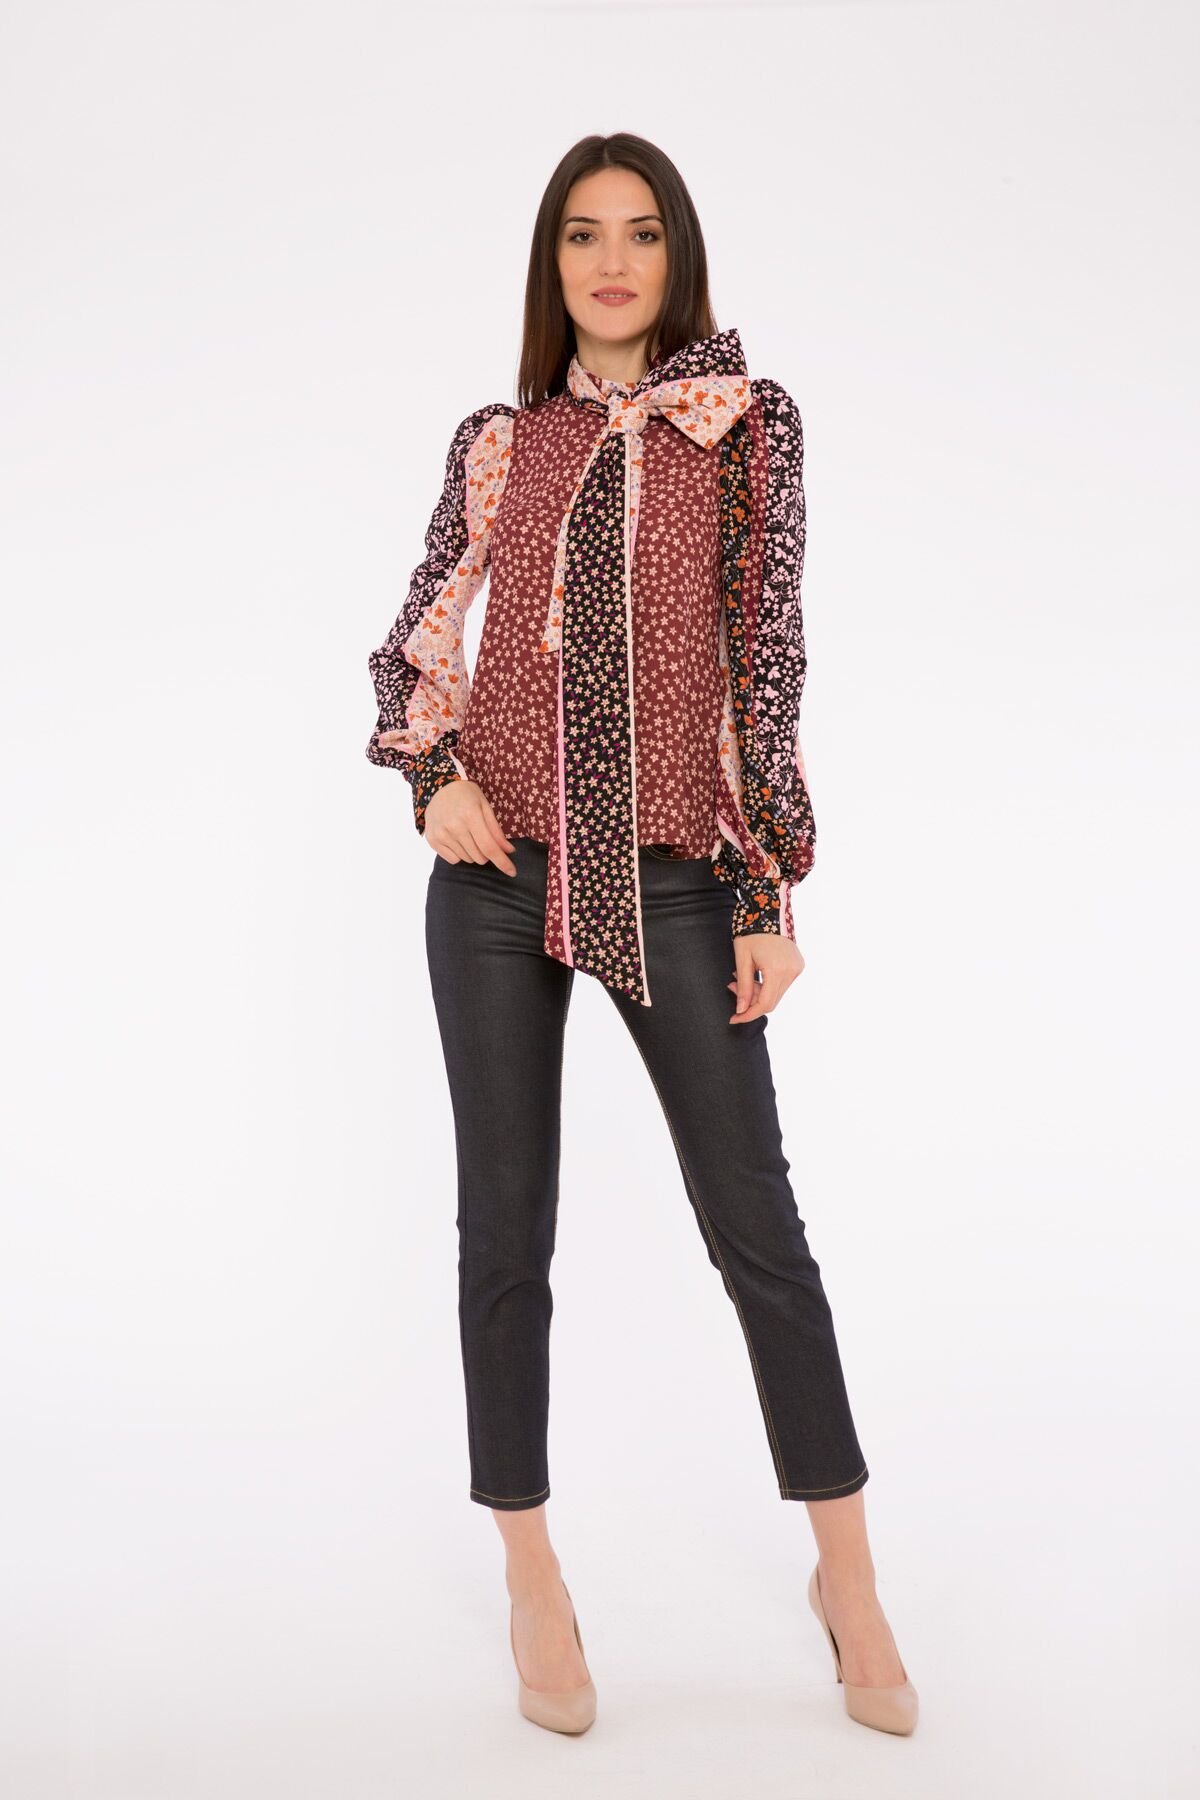 Contrast Detailed Stand Up Collar Floral Pattern Flowy Blouse